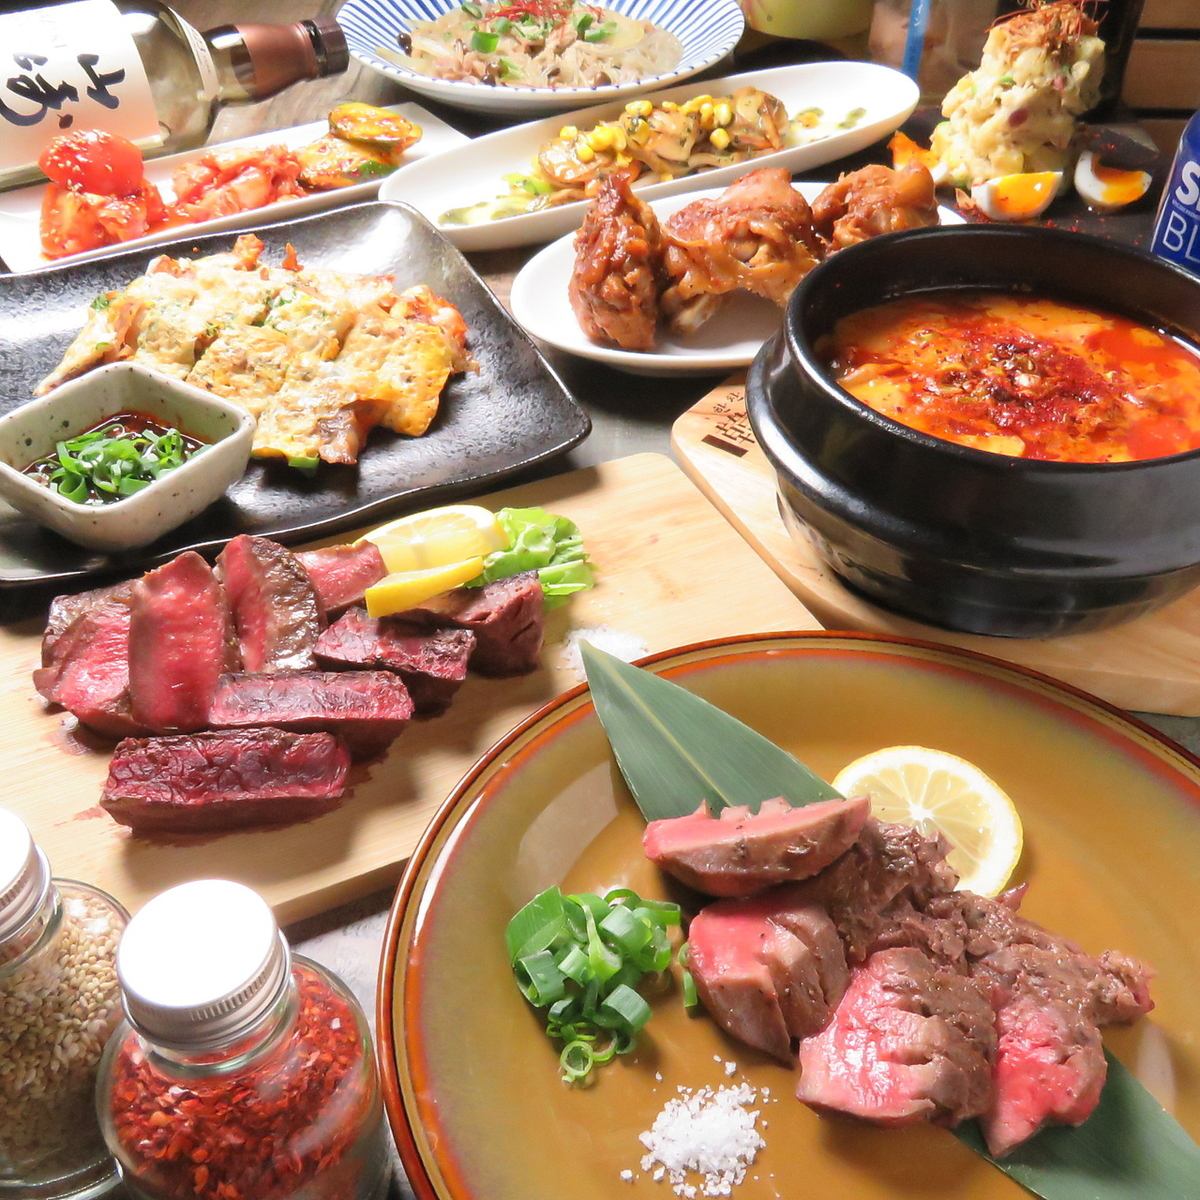 We offer a wide variety of authentic Korean dishes such as pancakes and samgyeopsal.